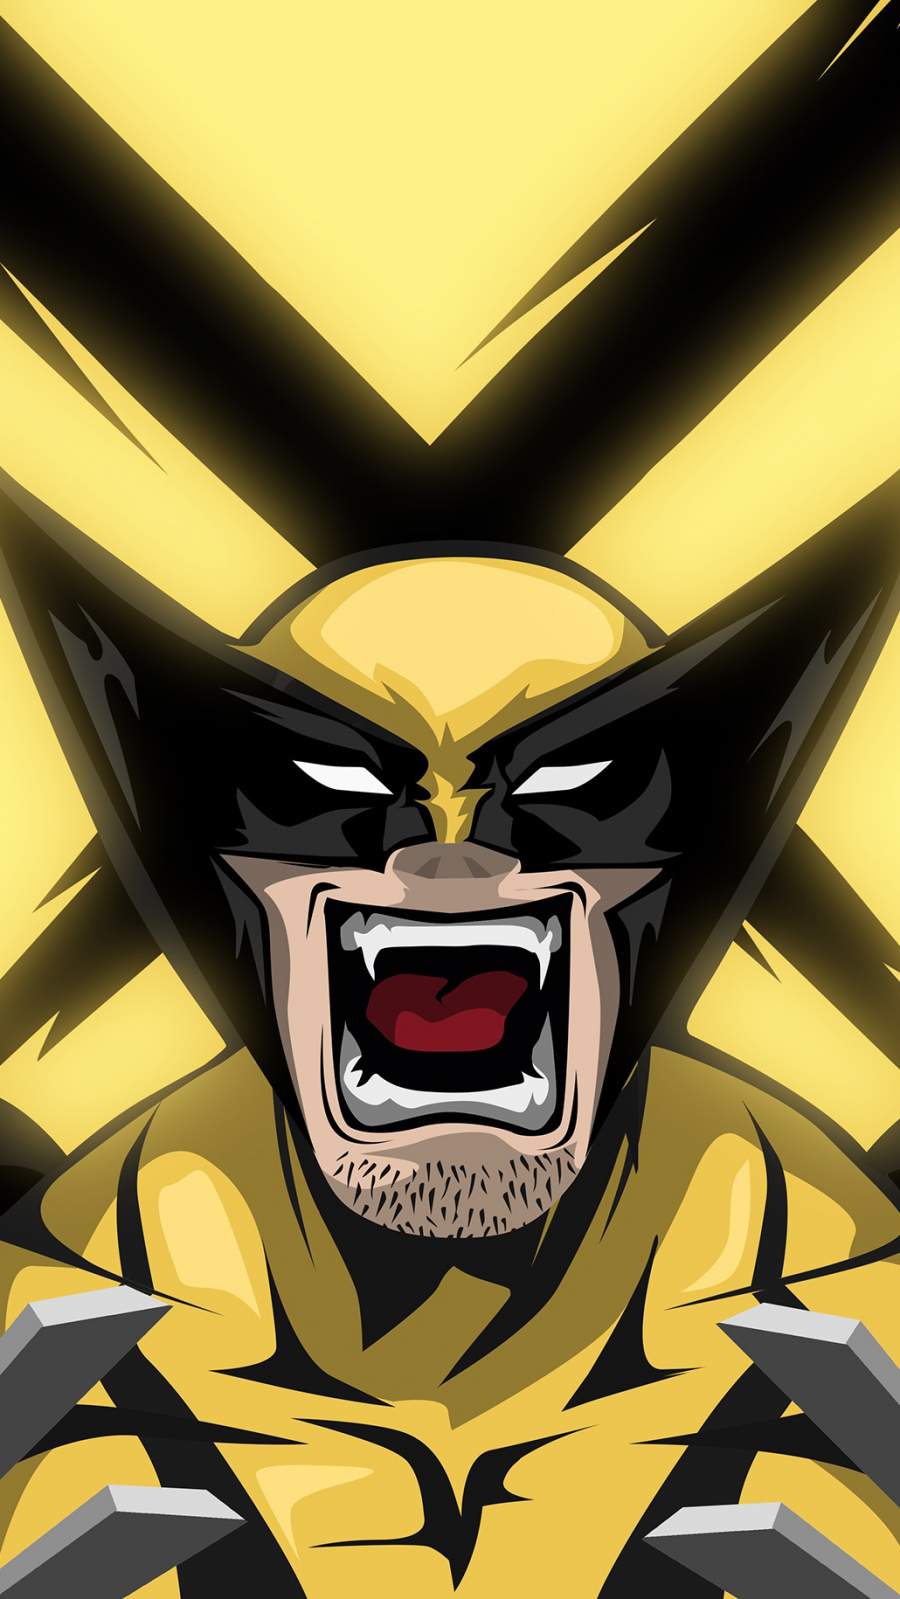 Wolverine Coming Back IPhone Wallpaper HD  IPhone Wallpapers  iPhone  Wallpapers